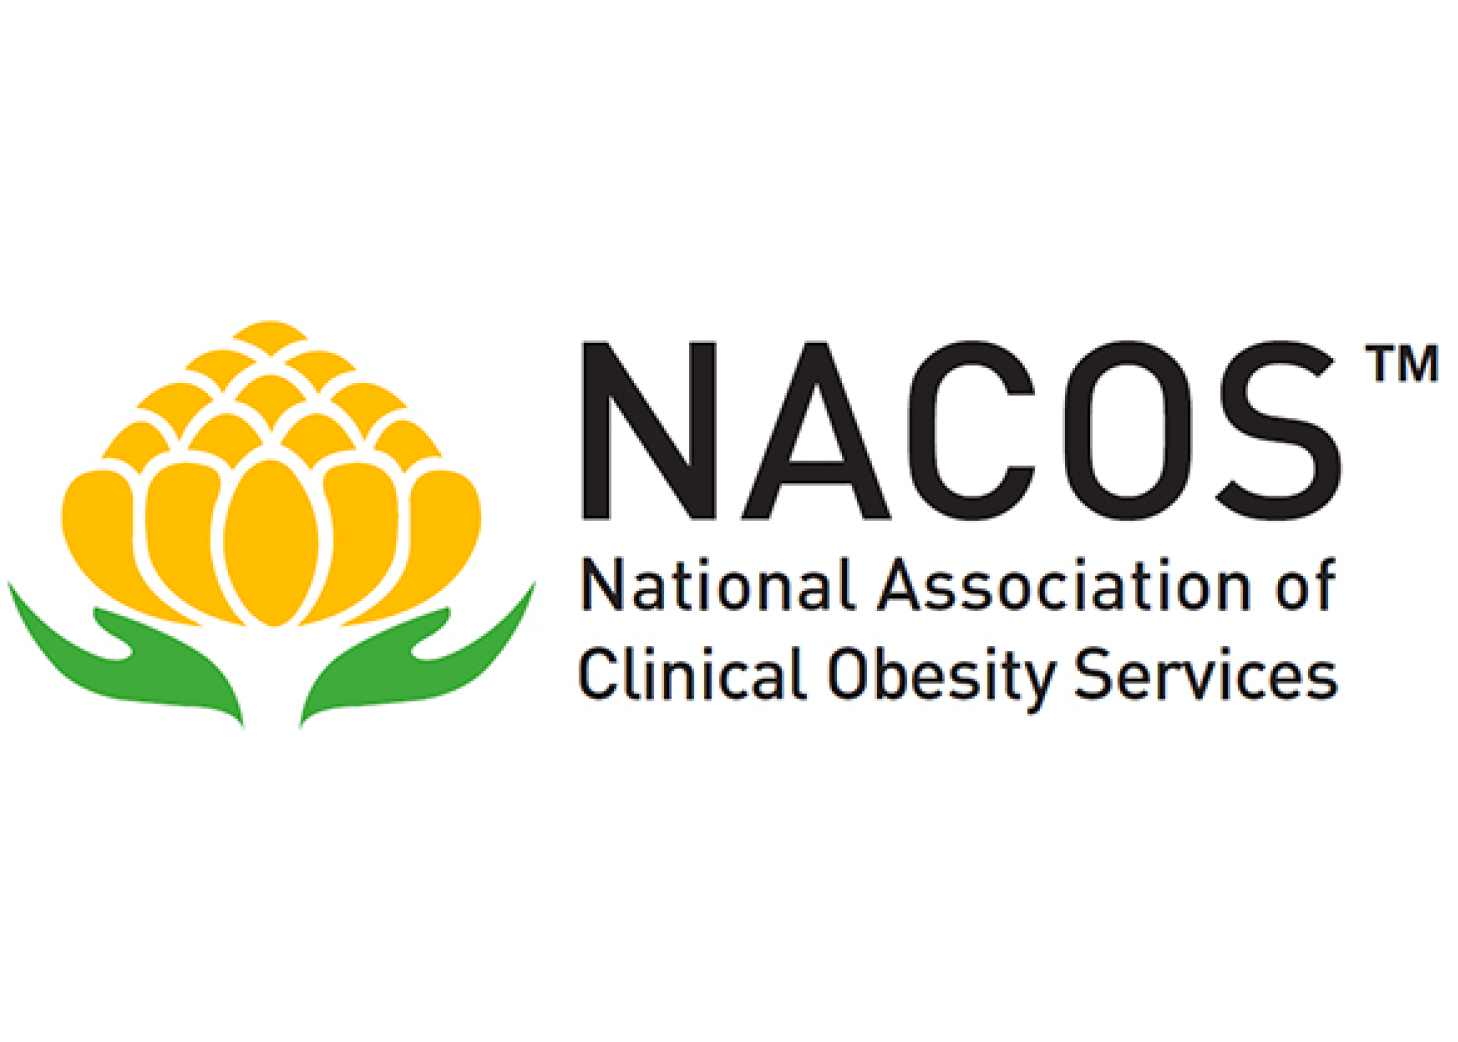 National Association of Clinical Obesity Services